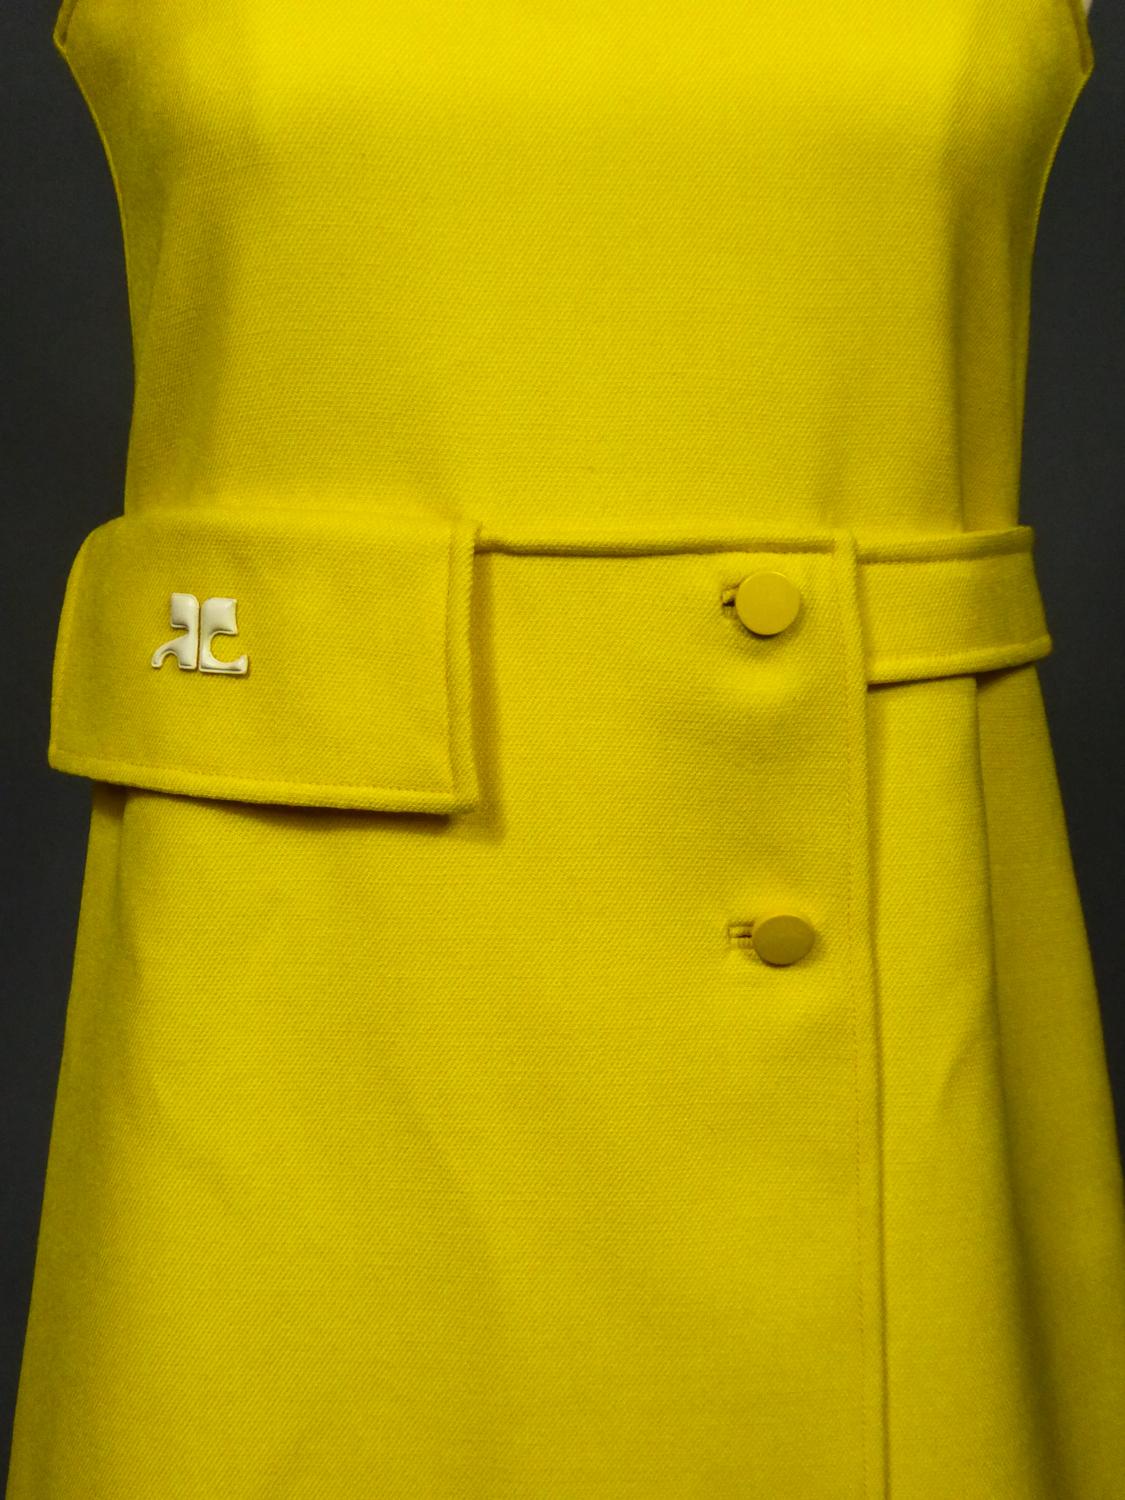 A Chasuble Mini Dress André Courrèges Haute Couture n° 102322 French Circa 1968 1